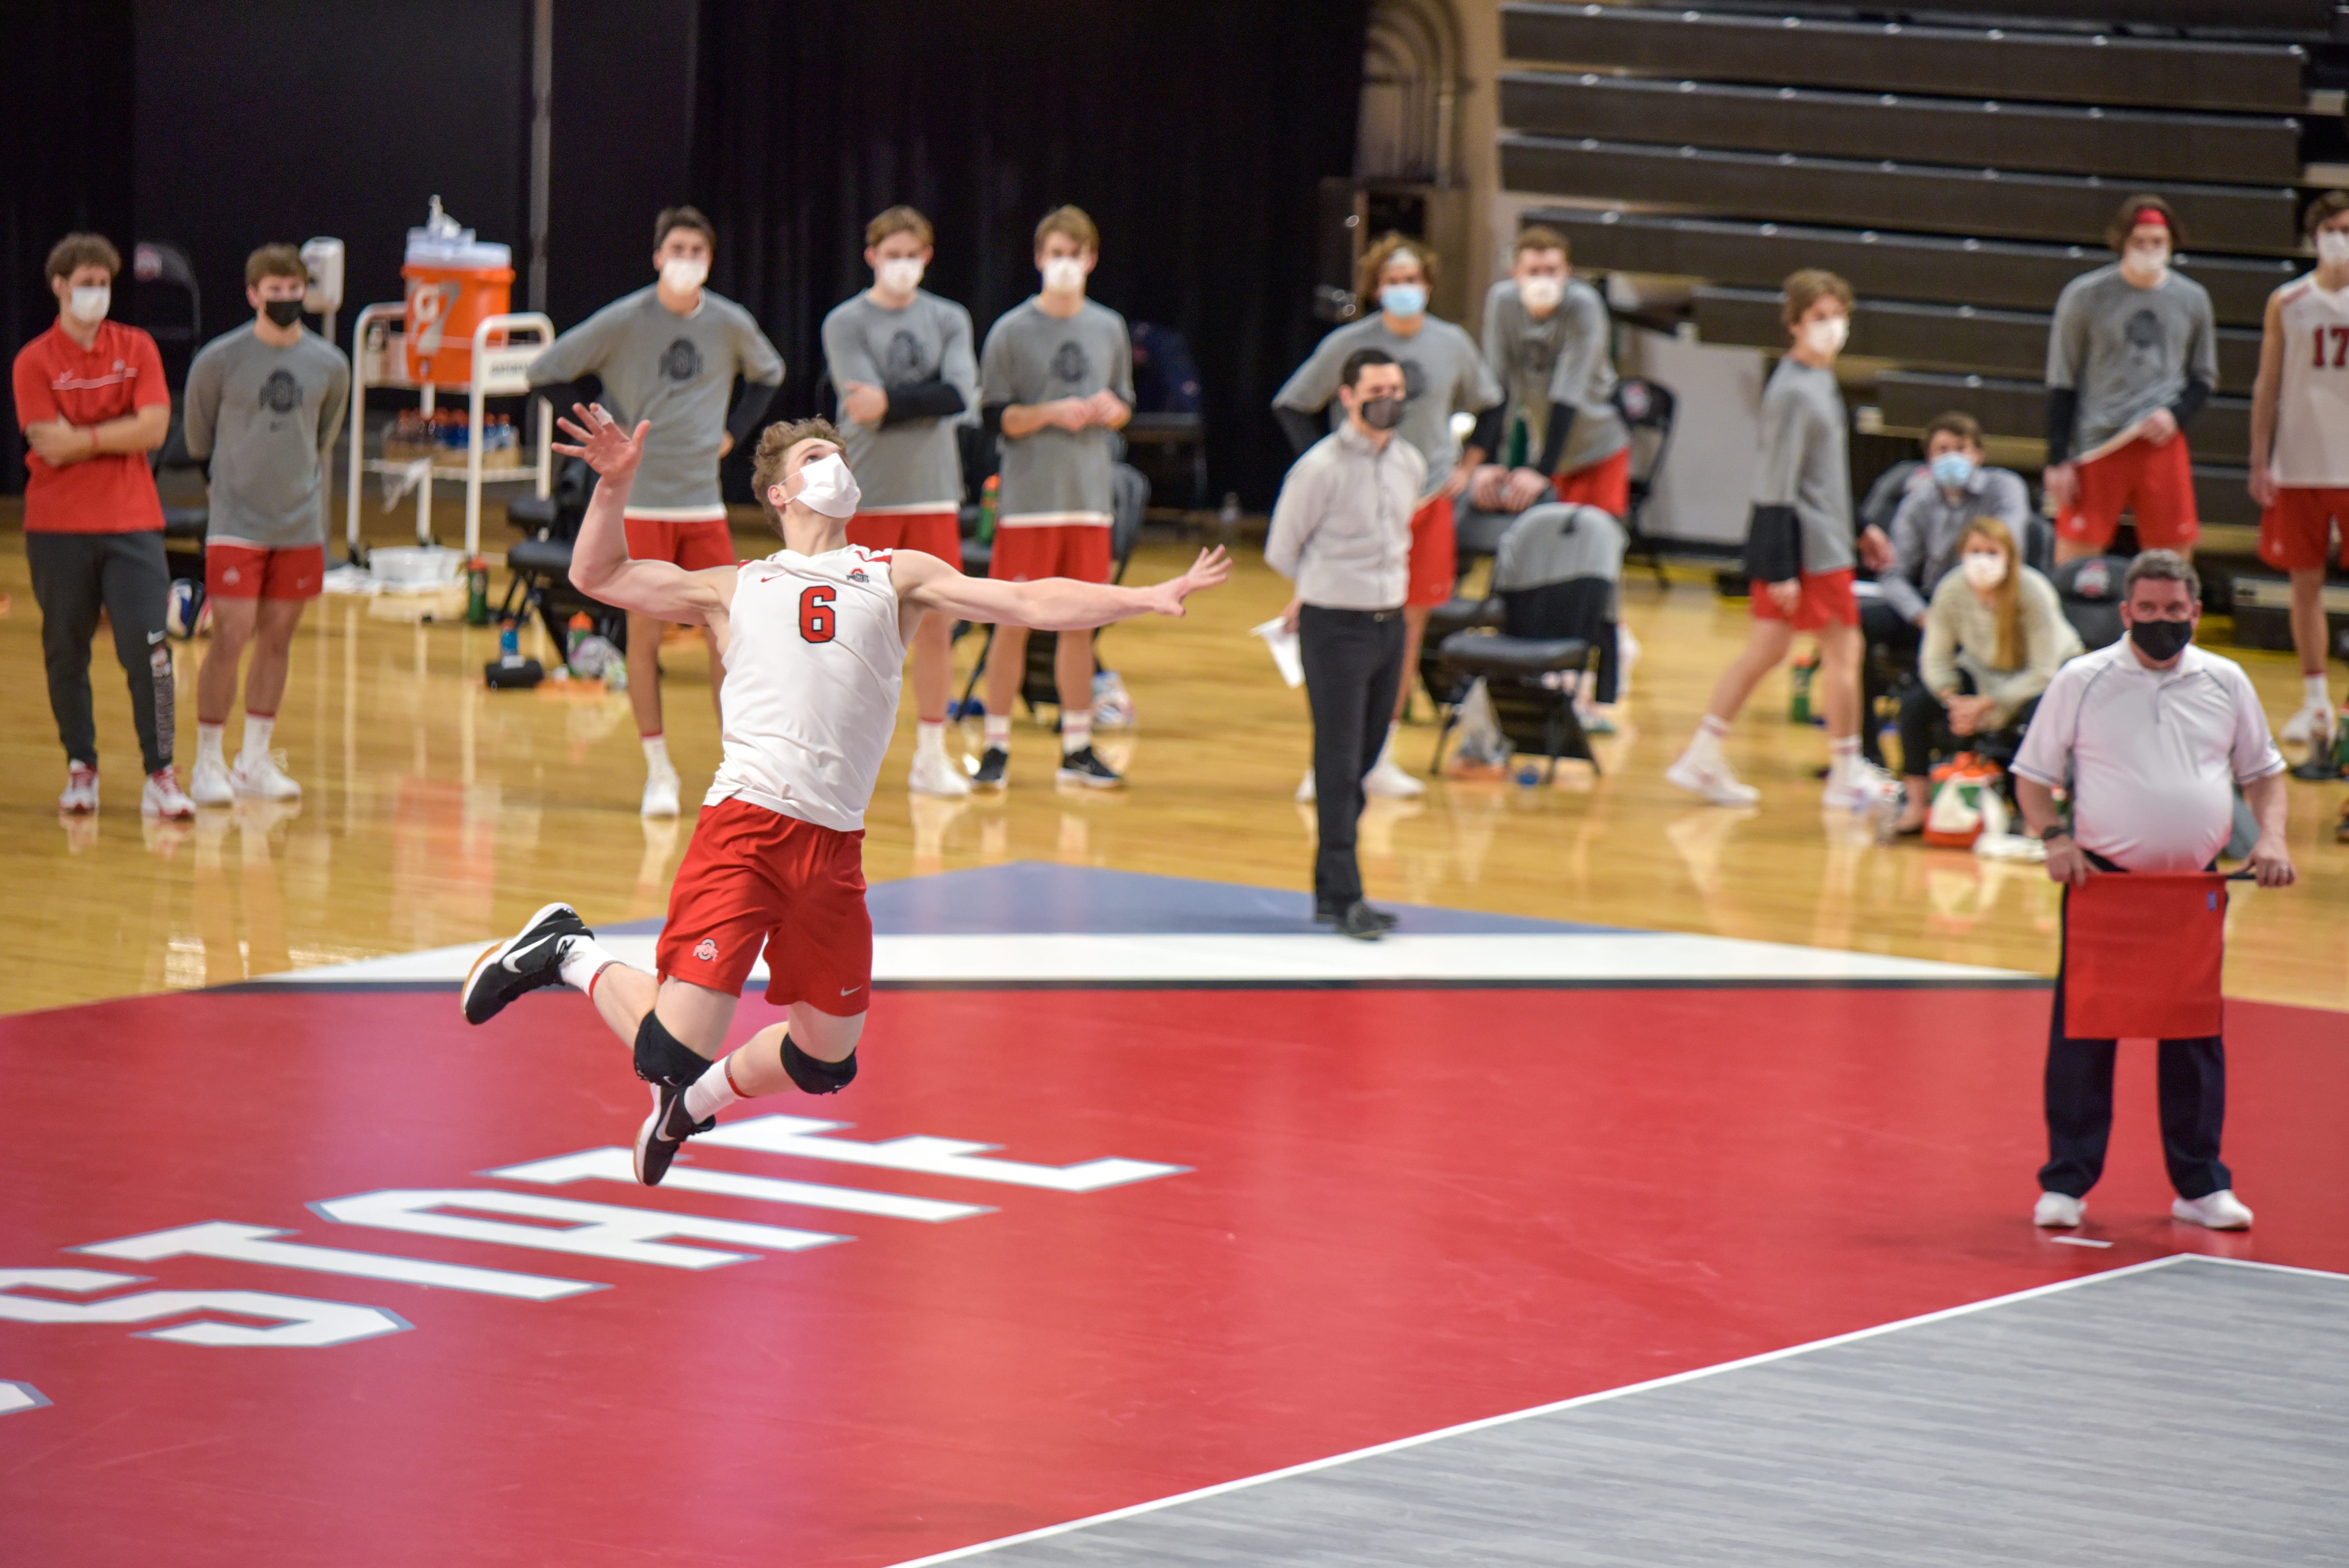 Men’s Volleyball: Buckeyes split series with Hawks to close out the regular season